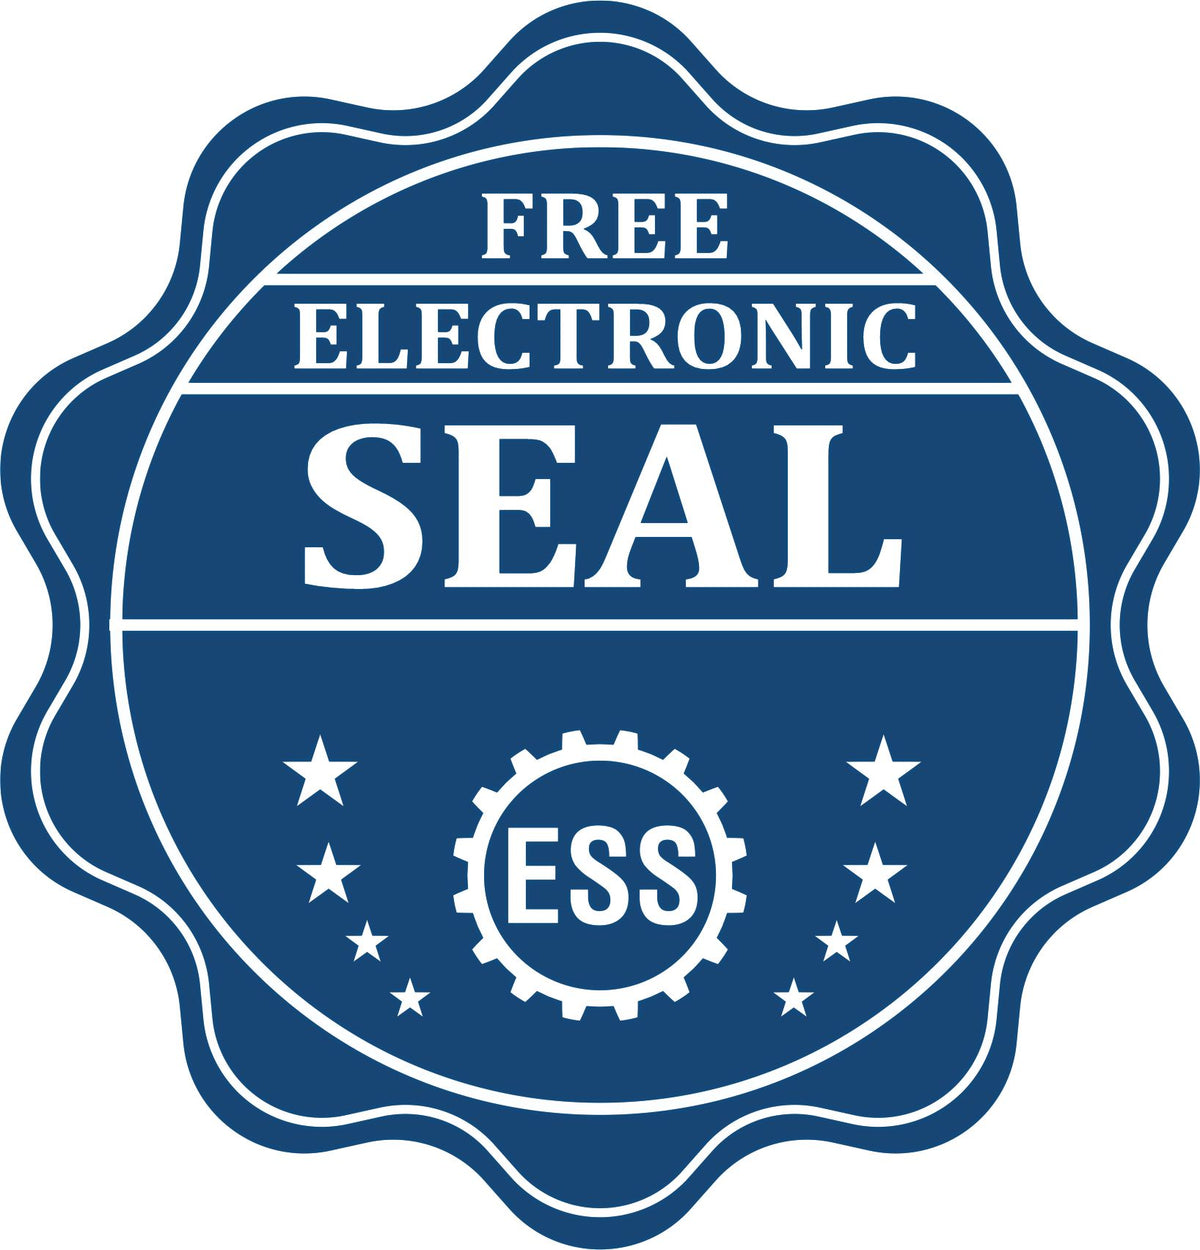 A badge showing a free electronic seal for the Premium MaxLight Pre-Inked Montana Engineering Stamp with stars and the ESS gear on the emblem.